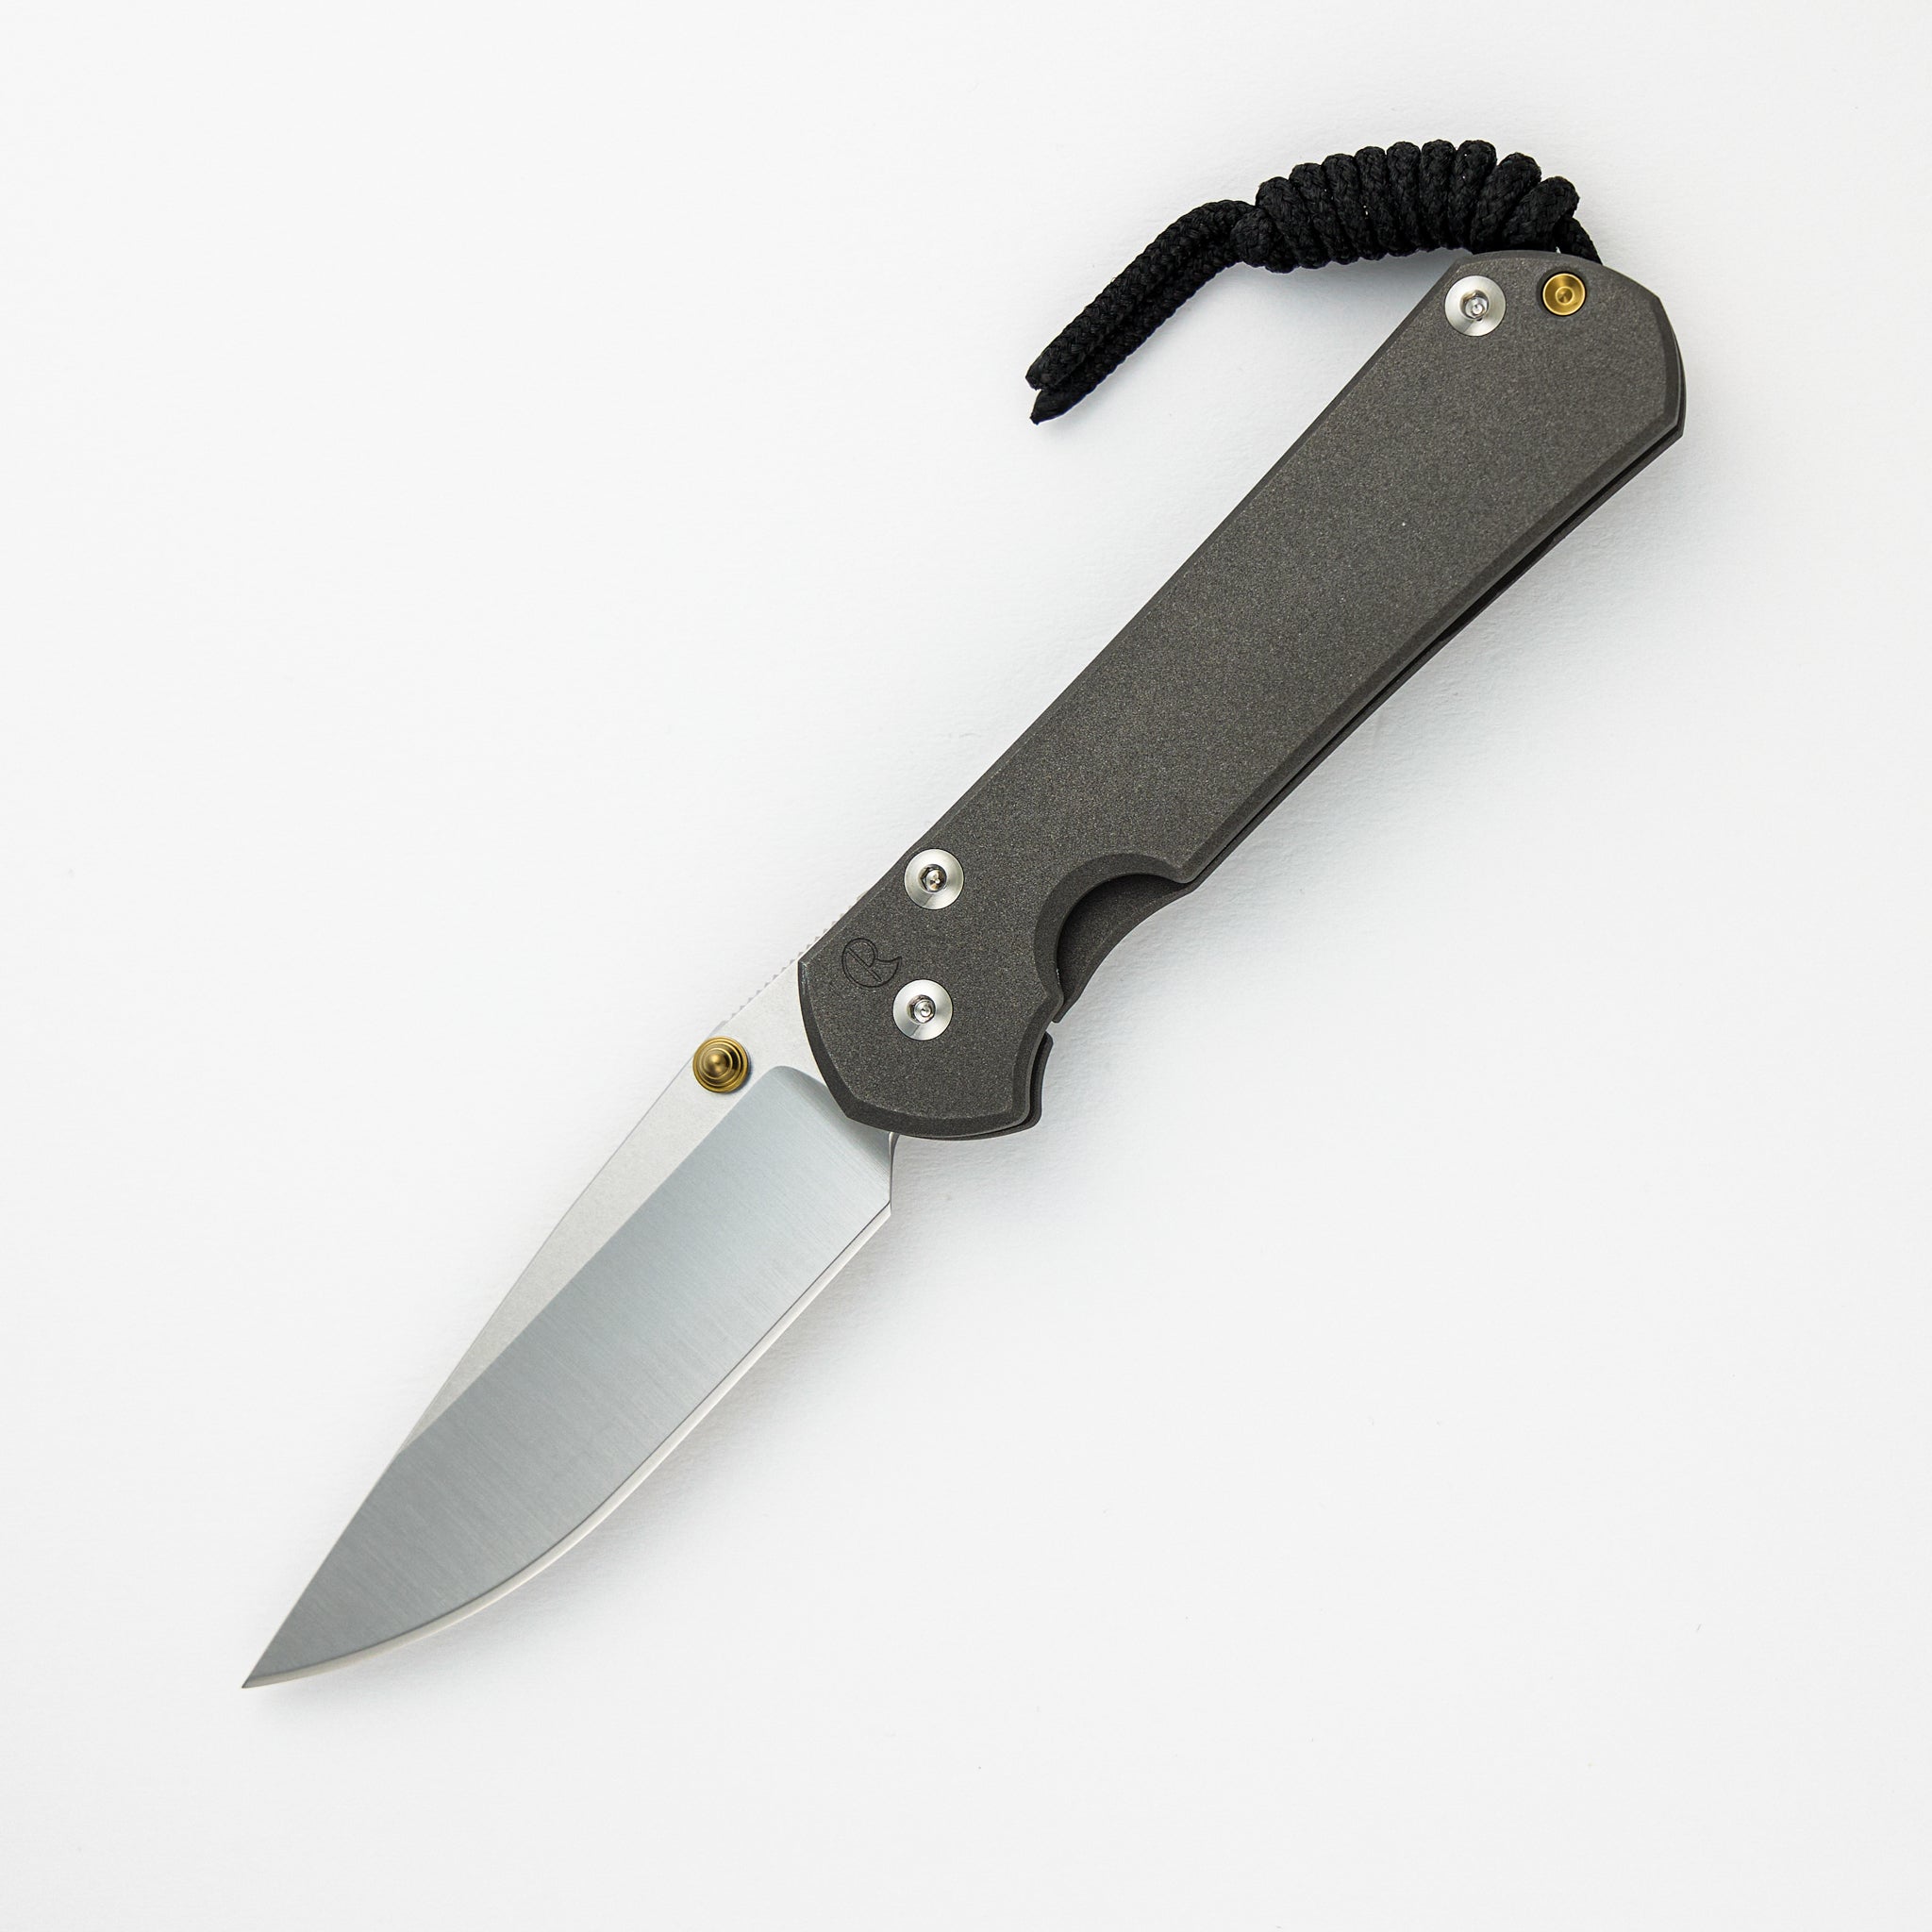 CHRIS REEVE SMALL SEBENZA 31 – POLISHED CPM MAGNACUT BLADE – GOLD DOUBLE THUMB LUGS